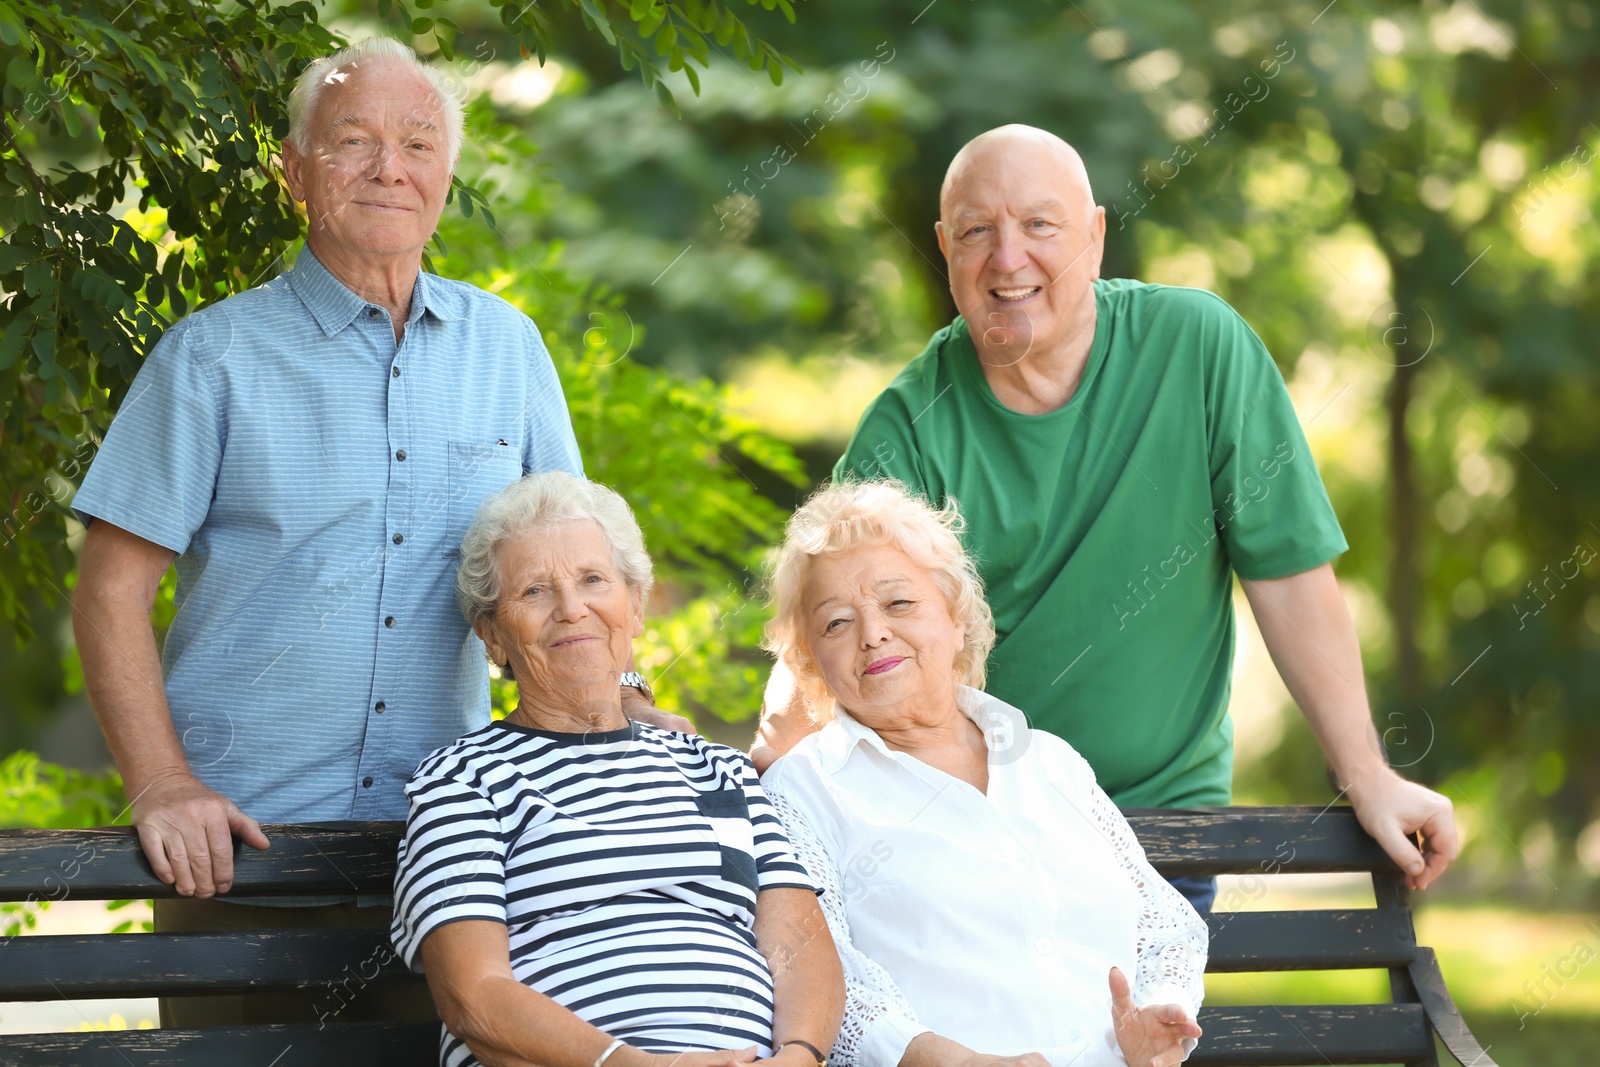 Photo of Elderly people spending time together in park